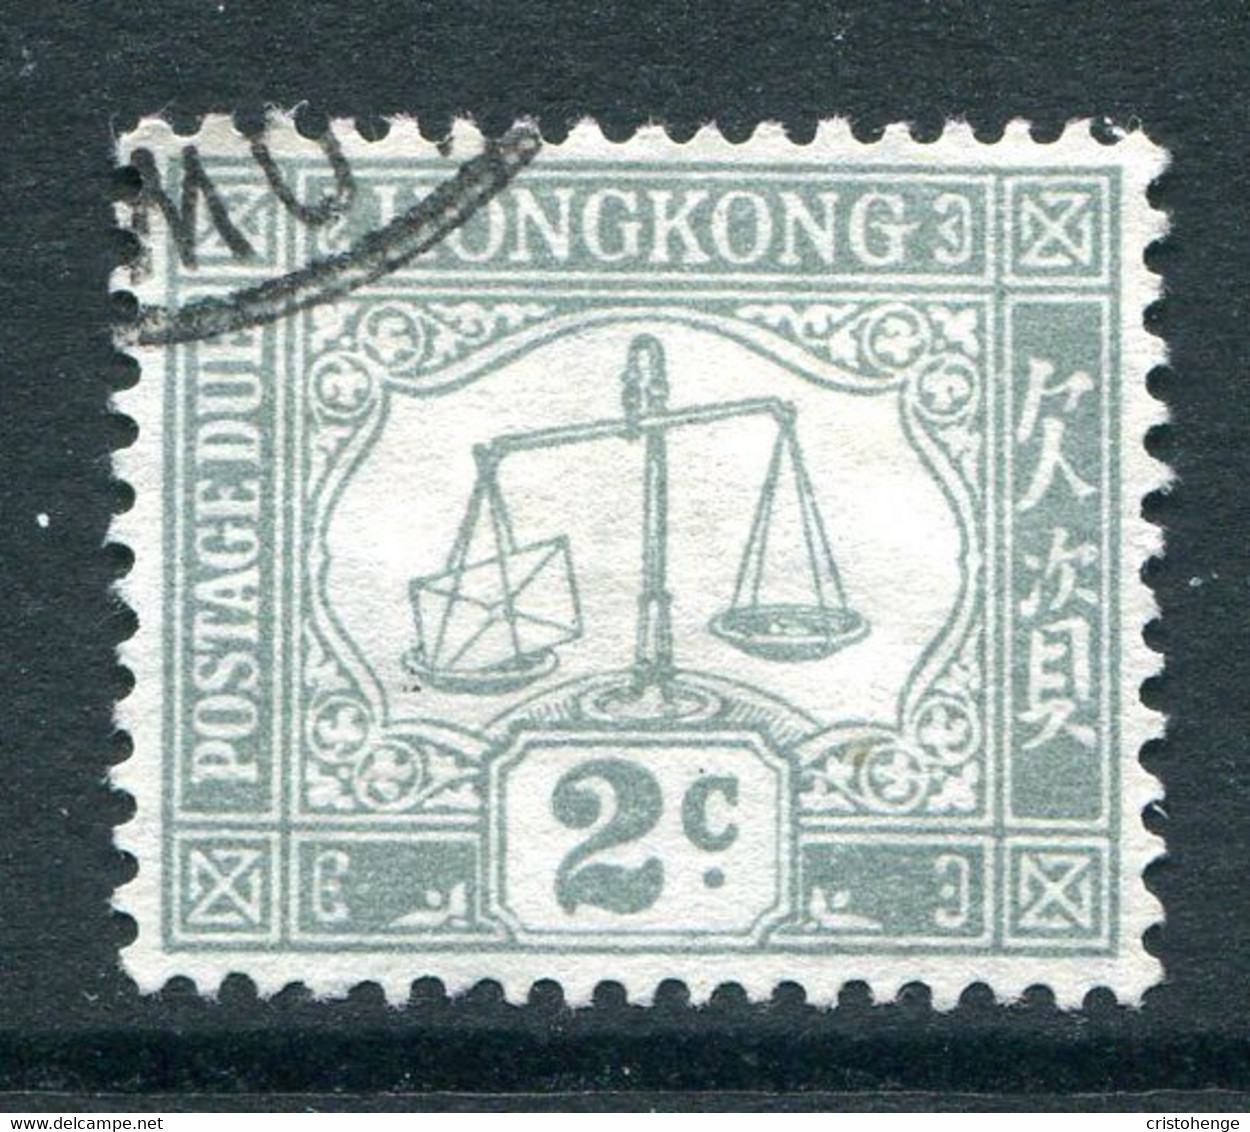 Hong Kong 1938-63 Postage Dues - 2c Grey - Chalky Paper - Used (SG D6a) - Postage Due